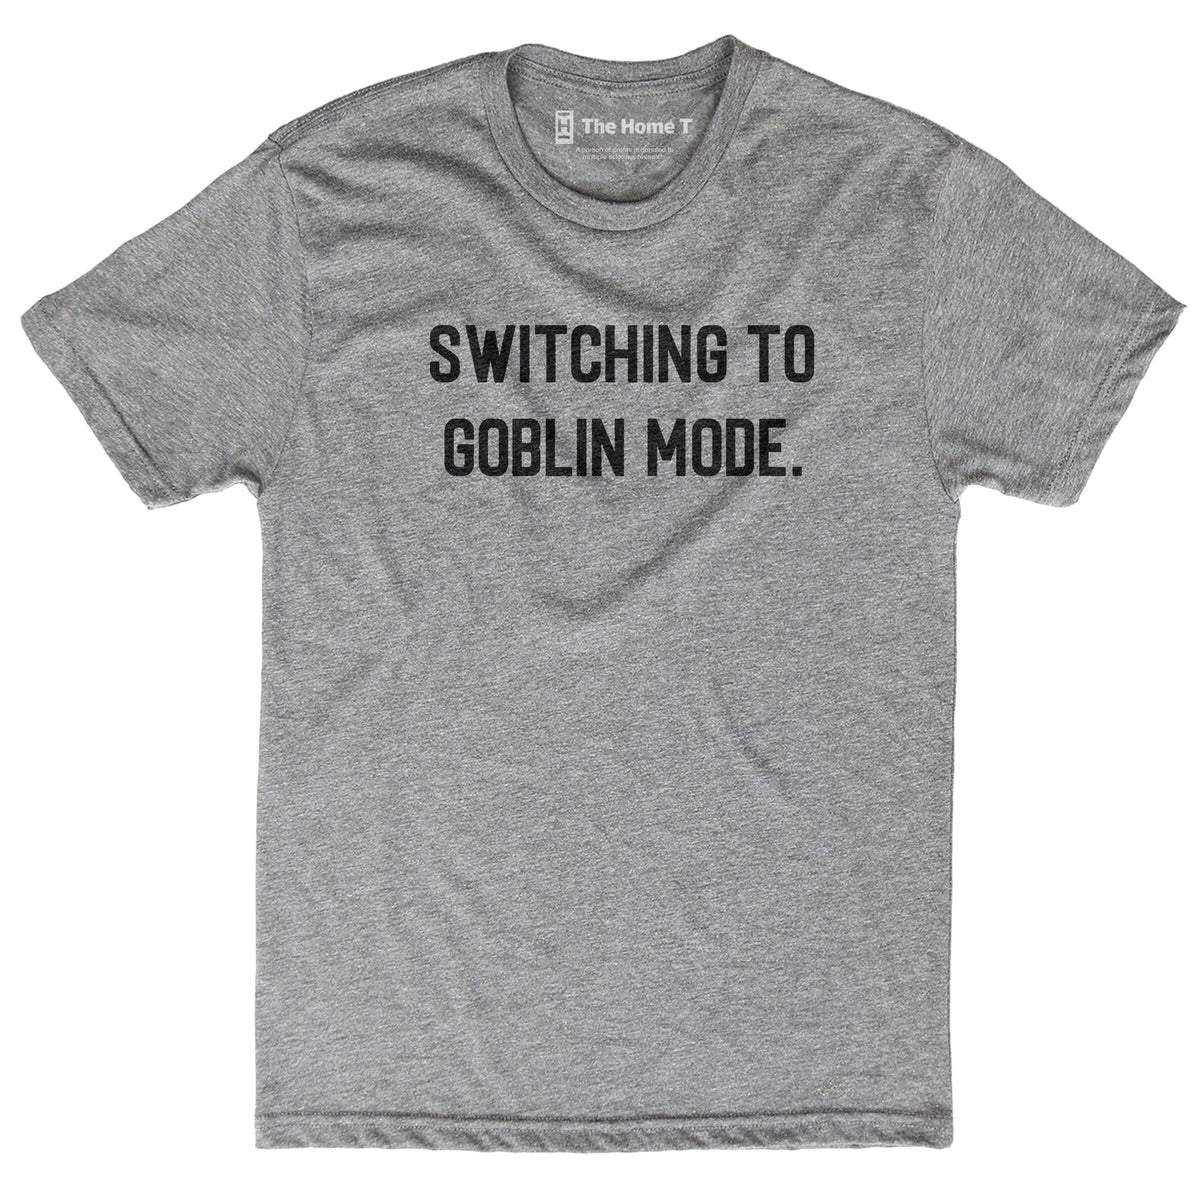 Switching to Goblin Mode